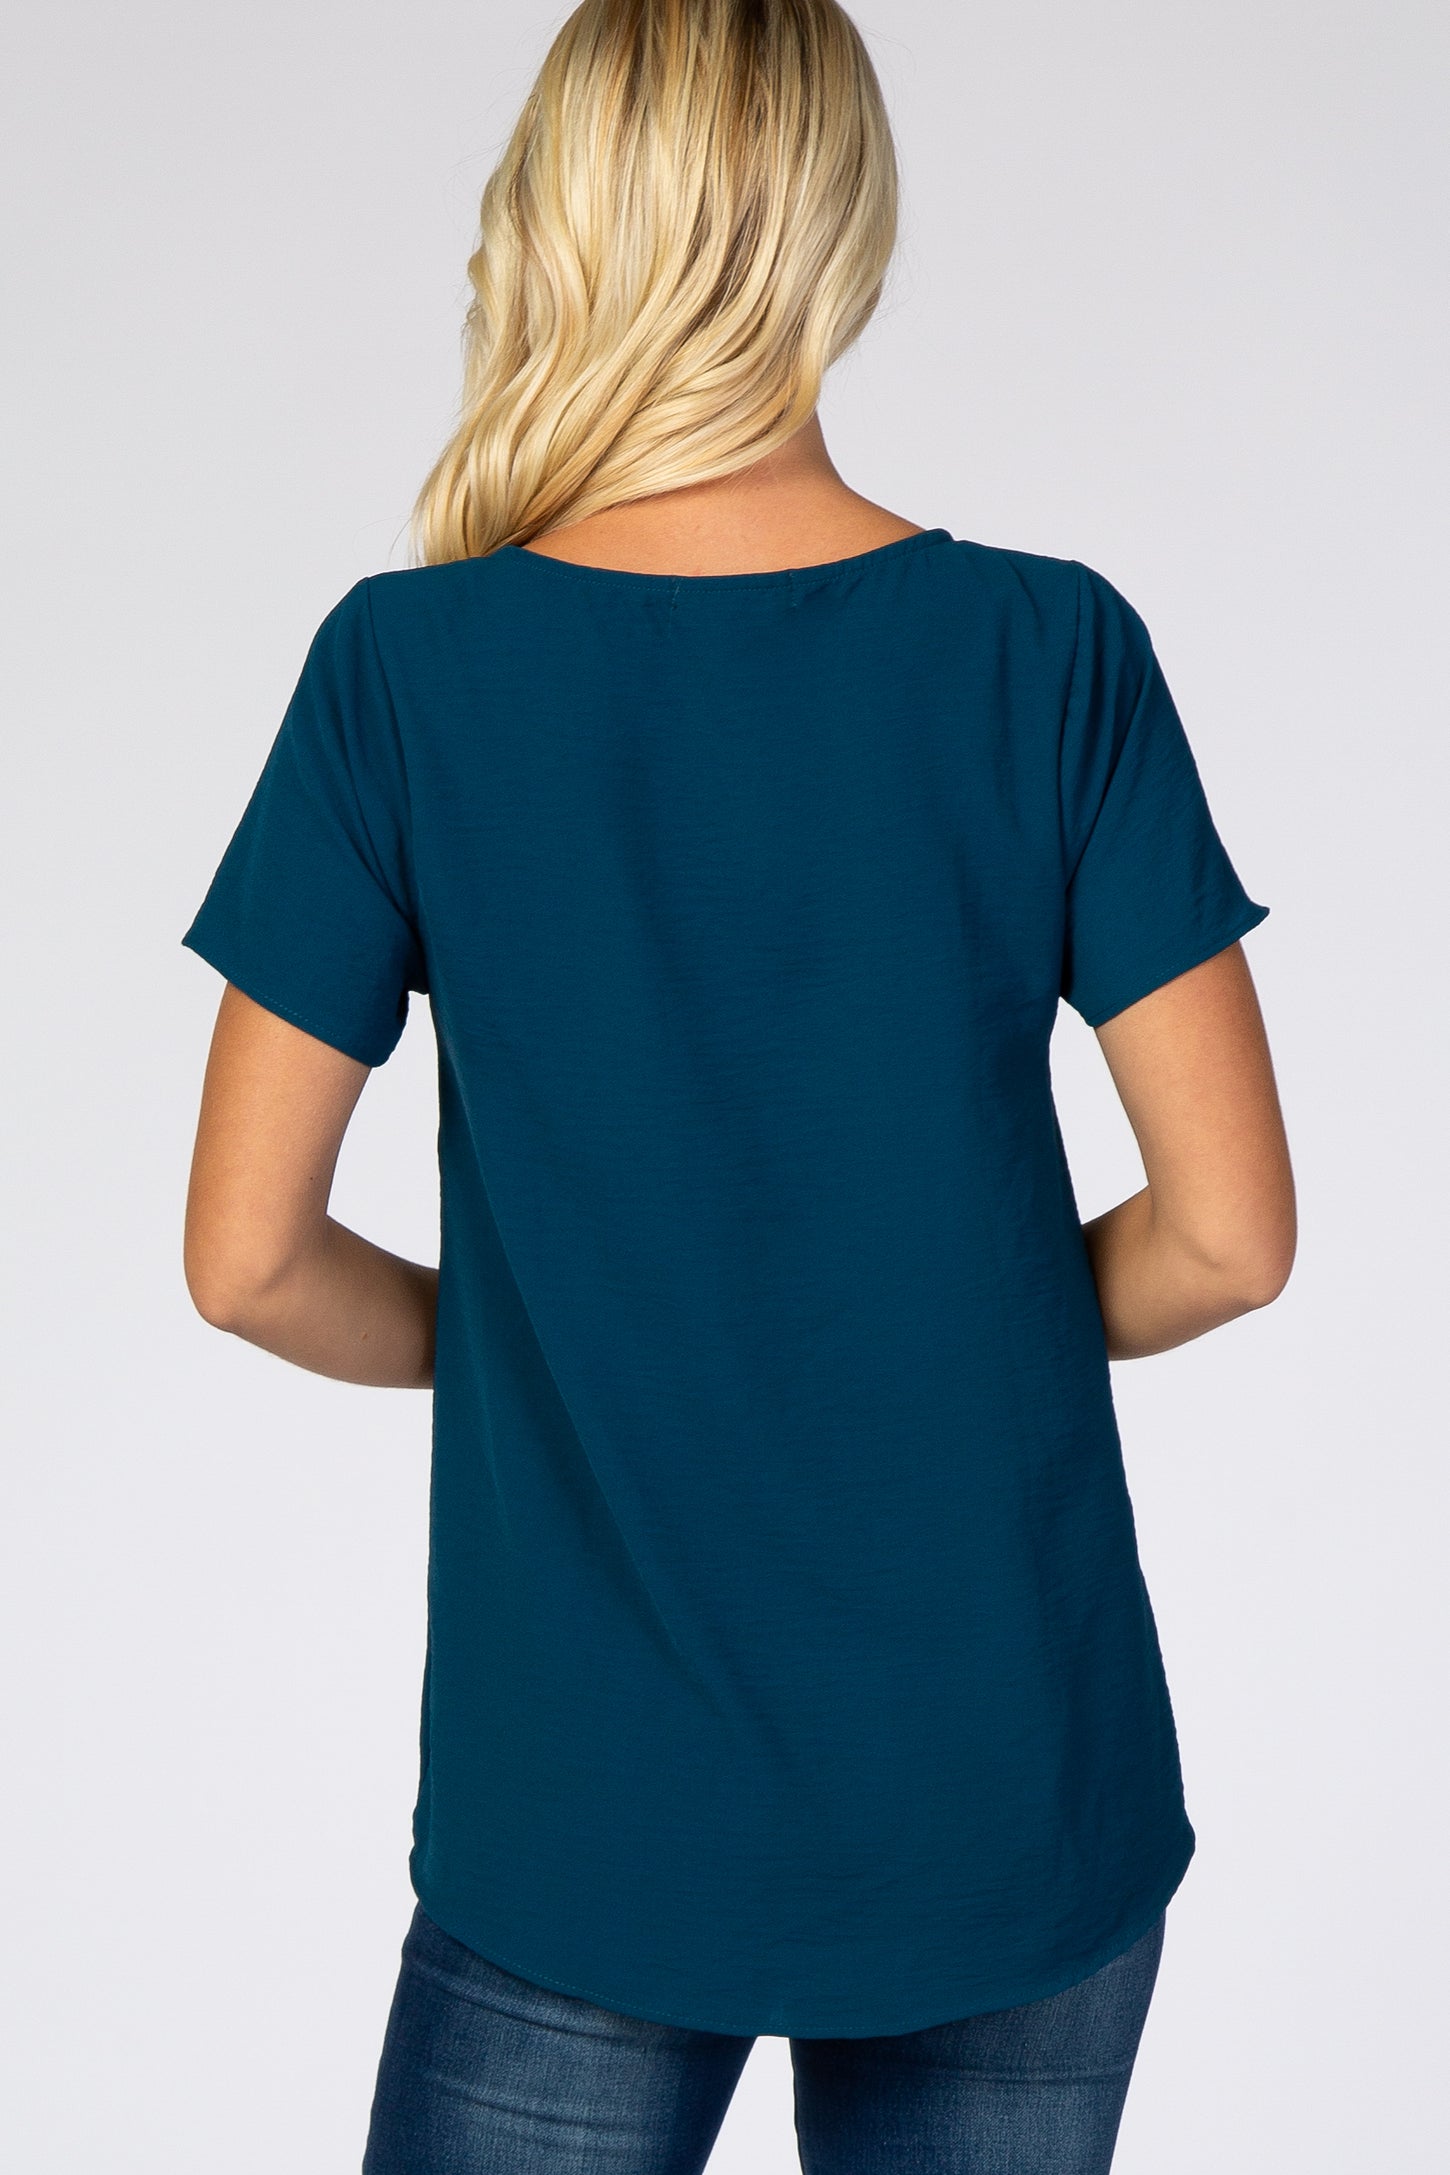 Teal Button Tie Front Top– PinkBlush